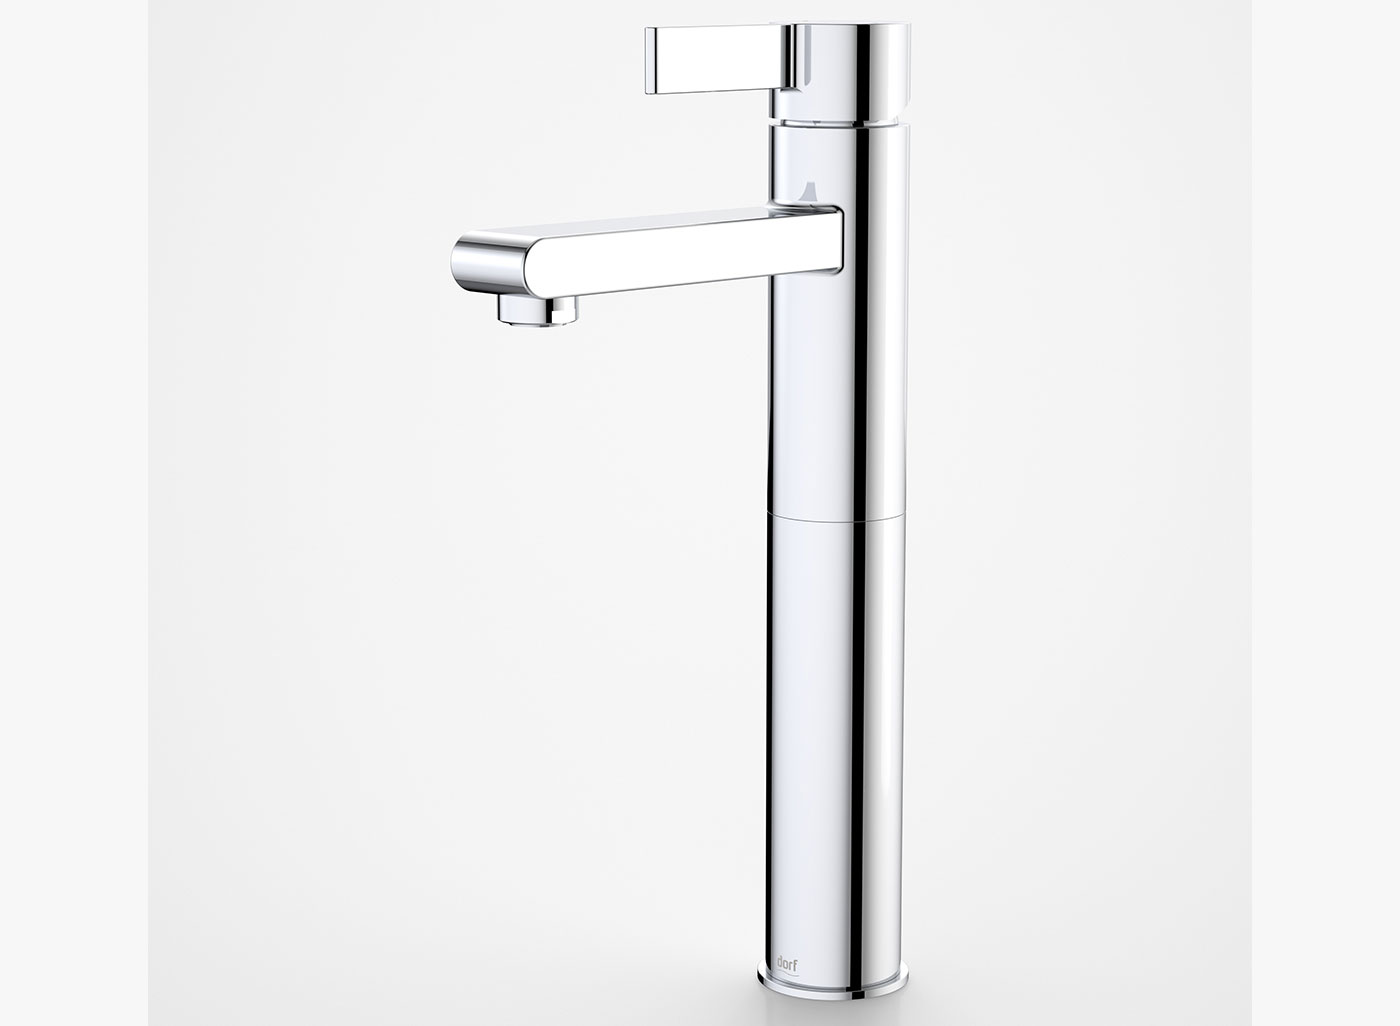 geometric looks and sleek proportions. Its strikingly signature design combined with a functional